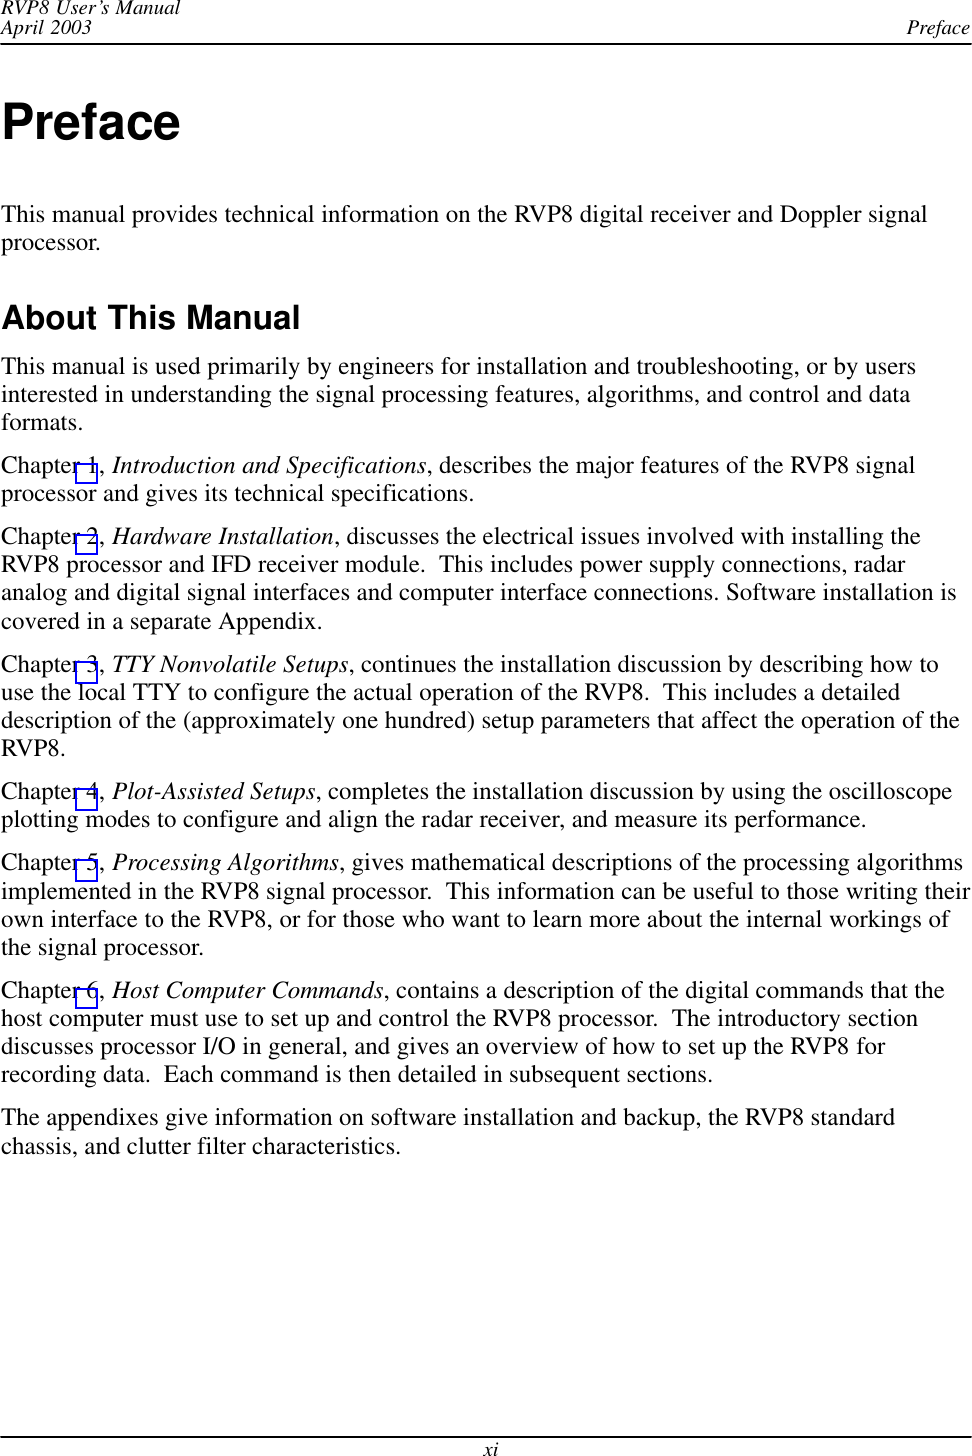 PrefaceRVP8 User’s ManualApril 2003xiPrefaceThis manual provides technical information on the RVP8 digital receiver and Doppler signalprocessor.About This ManualThis manual is used primarily by engineers for installation and troubleshooting, or by usersinterested in understanding the signal processing features, algorithms, and control and dataformats.Chapter 1, Introduction and Specifications, describes the major features of the RVP8 signalprocessor and gives its technical specifications.Chapter 2, Hardware Installation, discusses the electrical issues involved with installing theRVP8 processor and IFD receiver module.  This includes power supply connections, radaranalog and digital signal interfaces and computer interface connections. Software installation iscovered in a separate Appendix.Chapter 3, TTY Nonvolatile Setups, continues the installation discussion by describing how touse the local TTY to configure the actual operation of the RVP8.  This includes a detaileddescription of the (approximately one hundred) setup parameters that affect the operation of theRVP8.Chapter 4, Plot-Assisted Setups, completes the installation discussion by using the oscilloscopeplotting modes to configure and align the radar receiver, and measure its performance.Chapter 5, Processing Algorithms, gives mathematical descriptions of the processing algorithmsimplemented in the RVP8 signal processor.  This information can be useful to those writing theirown interface to the RVP8, or for those who want to learn more about the internal workings ofthe signal processor.Chapter 6, Host Computer Commands, contains a description of the digital commands that thehost computer must use to set up and control the RVP8 processor.  The introductory sectiondiscusses processor I/O in general, and gives an overview of how to set up the RVP8 forrecording data.  Each command is then detailed in subsequent sections.The appendixes give information on software installation and backup, the RVP8 standardchassis, and clutter filter characteristics.